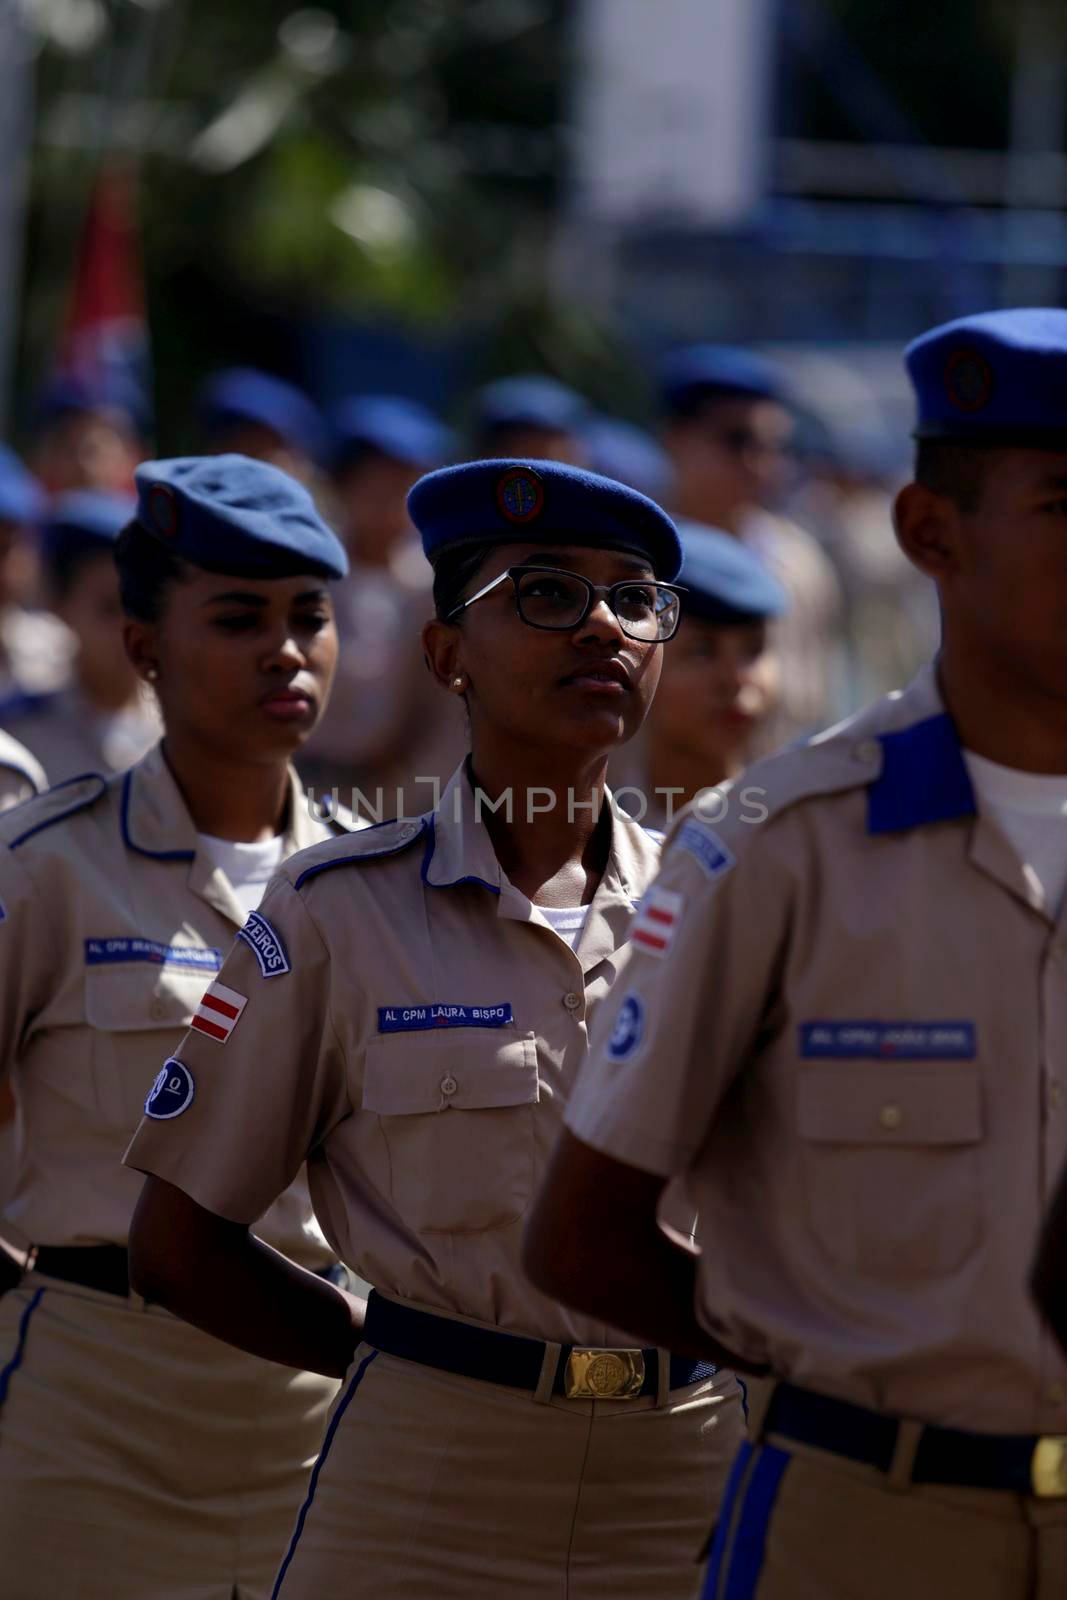 salvador, bahia, brazil - july 24, 2019: students from the College of the Military Police of Bahia are seen training in the school yard in the city of Salvador.